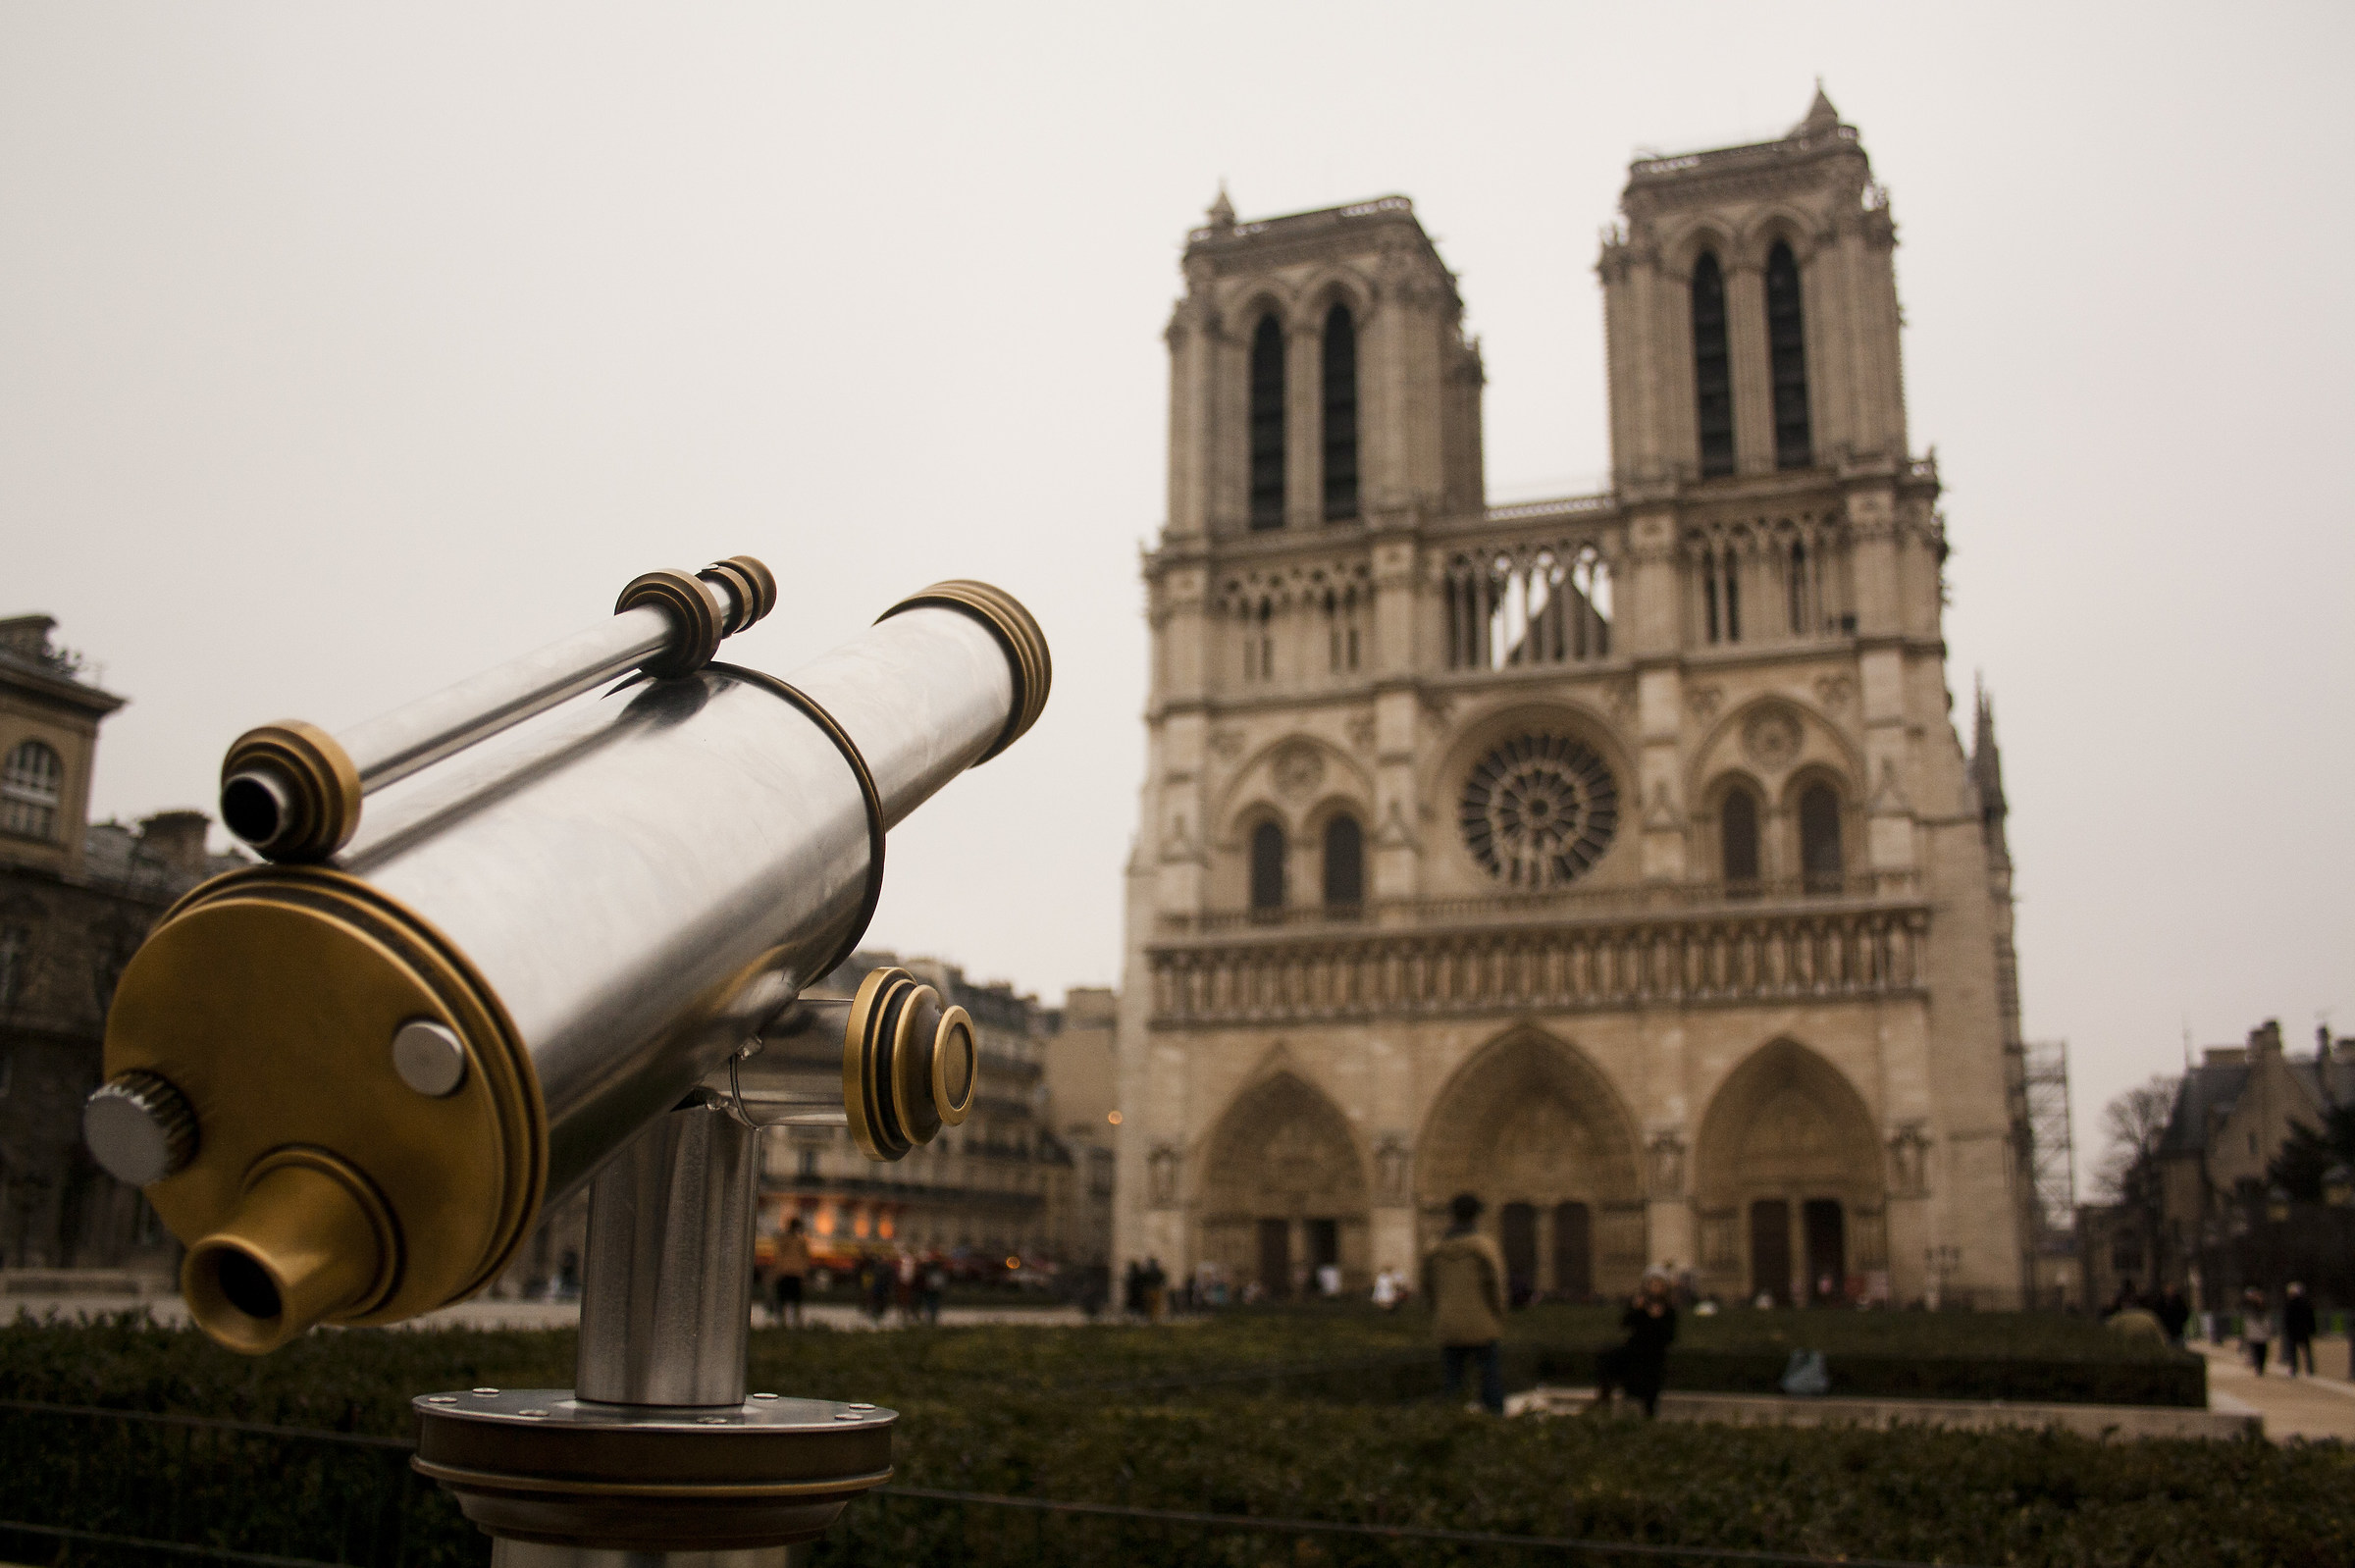 Looking at Notre Dame...